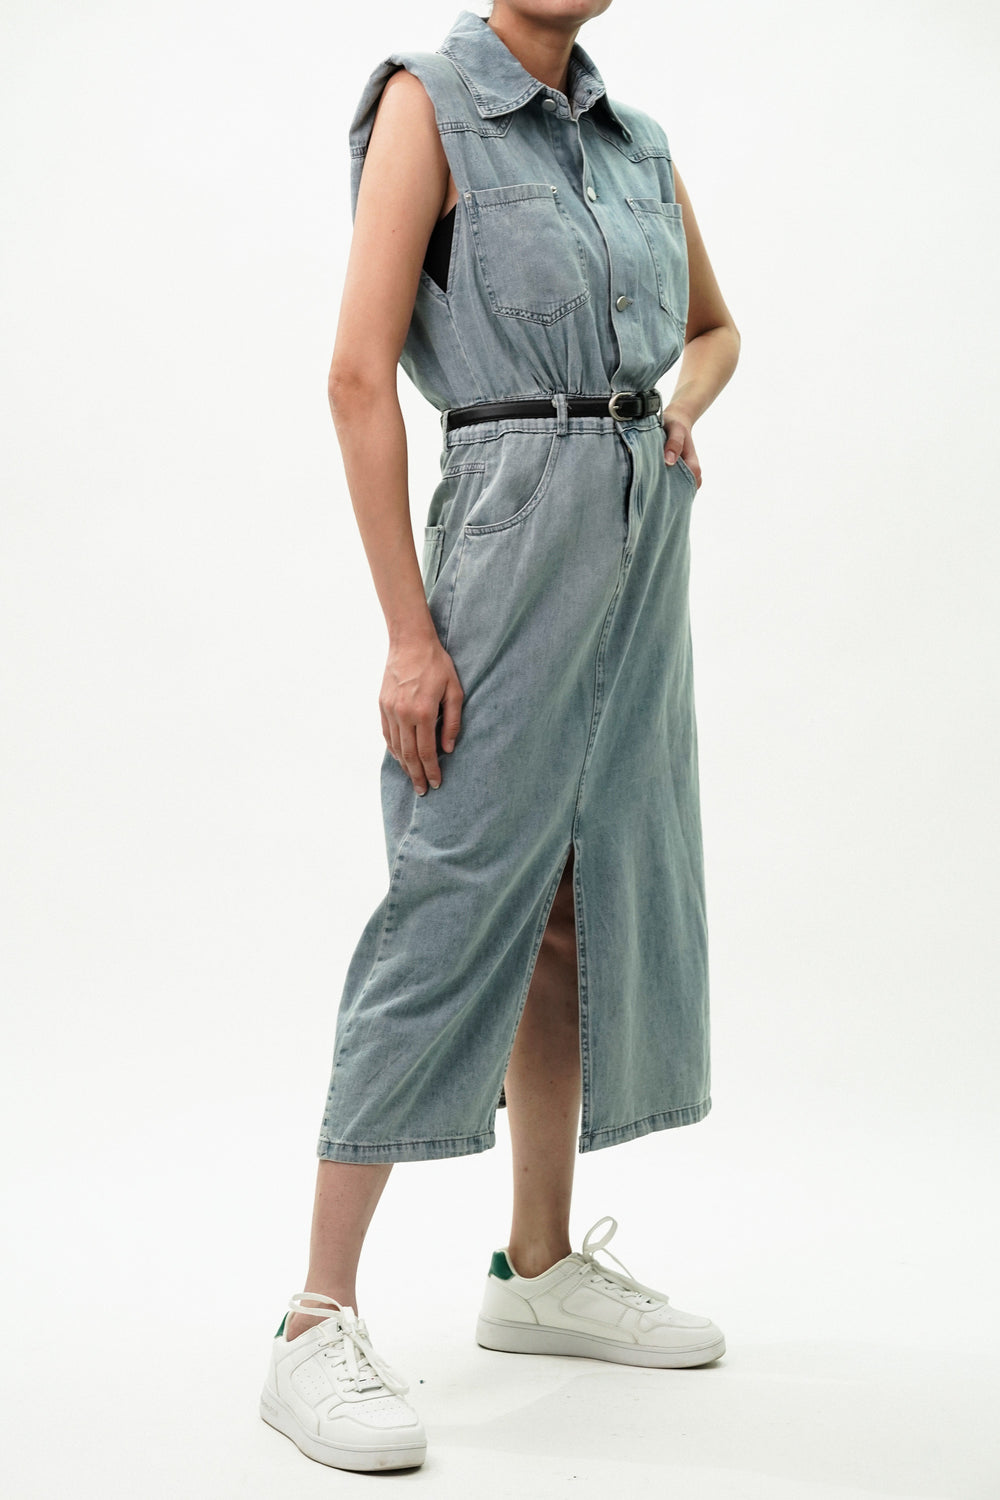 Blue cotton dress for casual wear